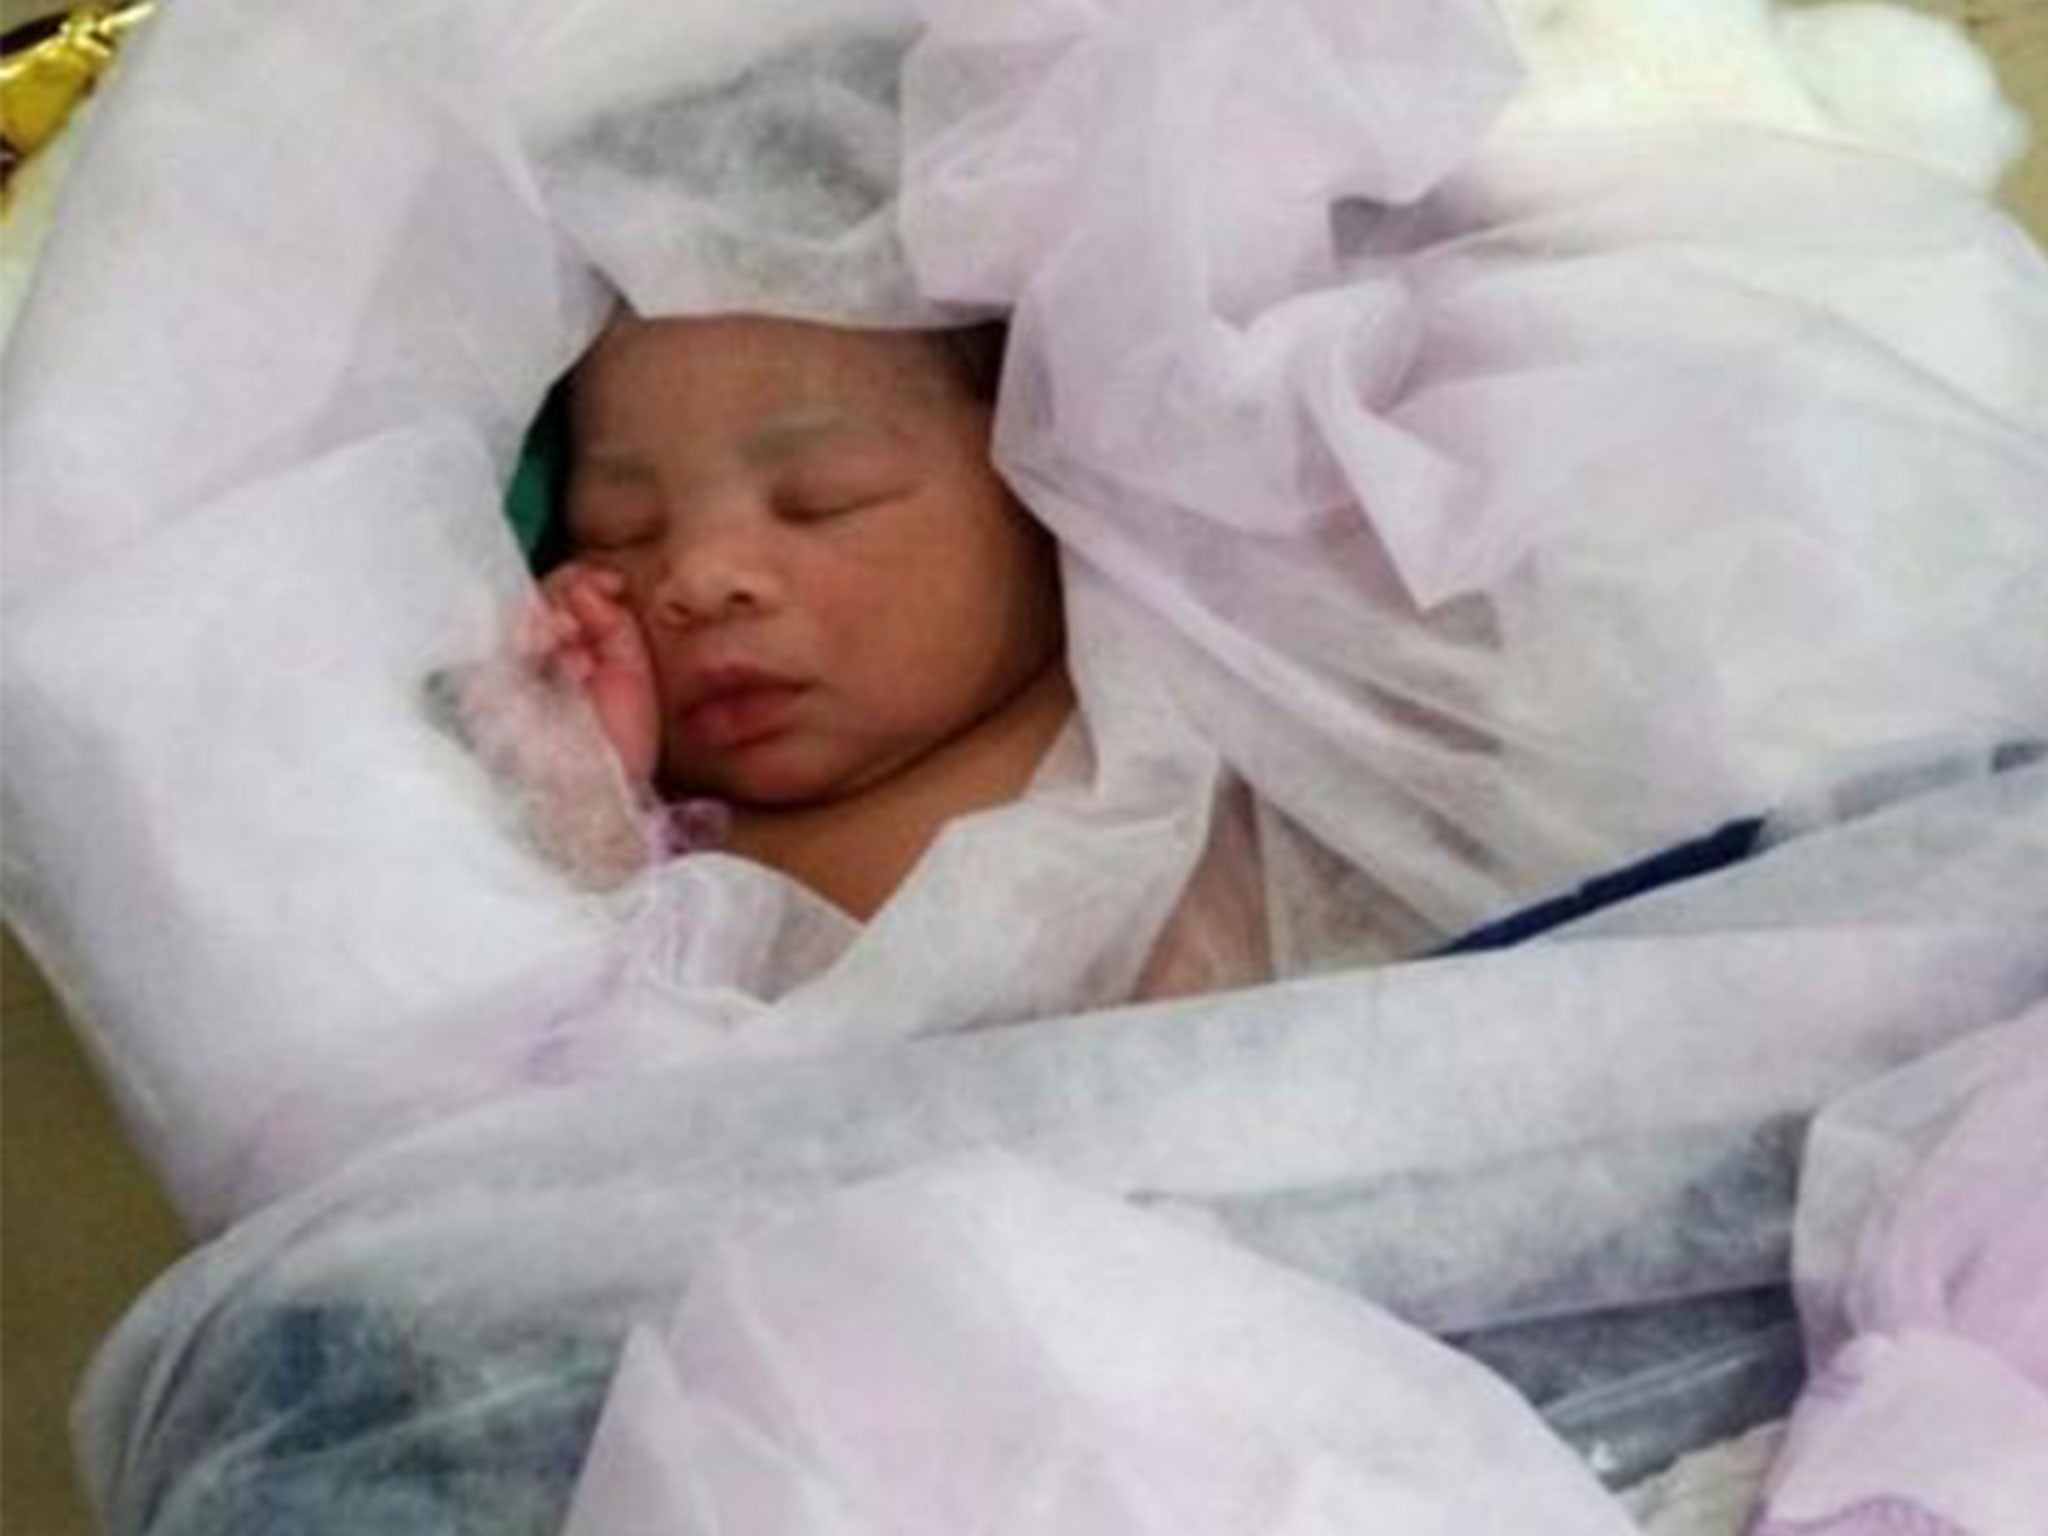 A baby girl born on an Italian military ship in the Mediterranean after her mother was rescued from a boat